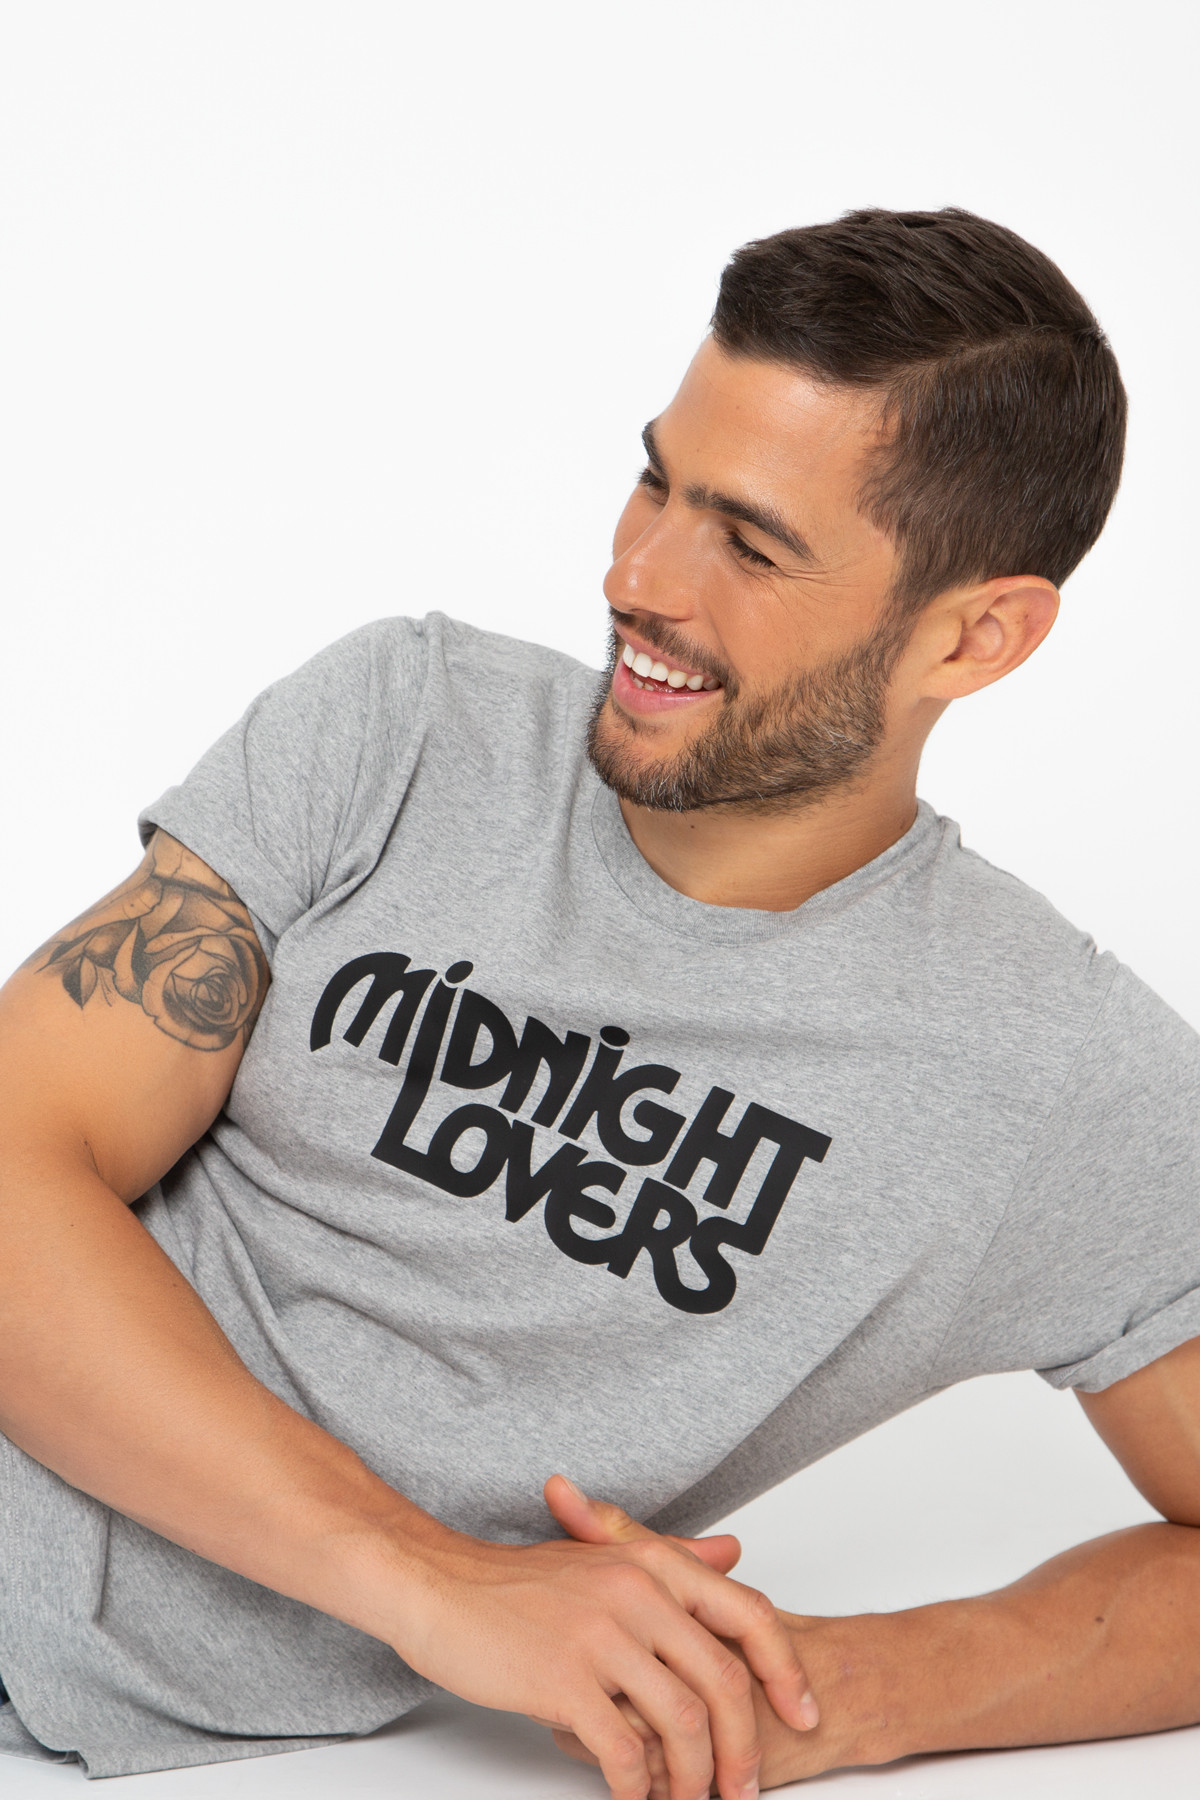 Tshirt MIDNIGHT LOVERS French Disorder